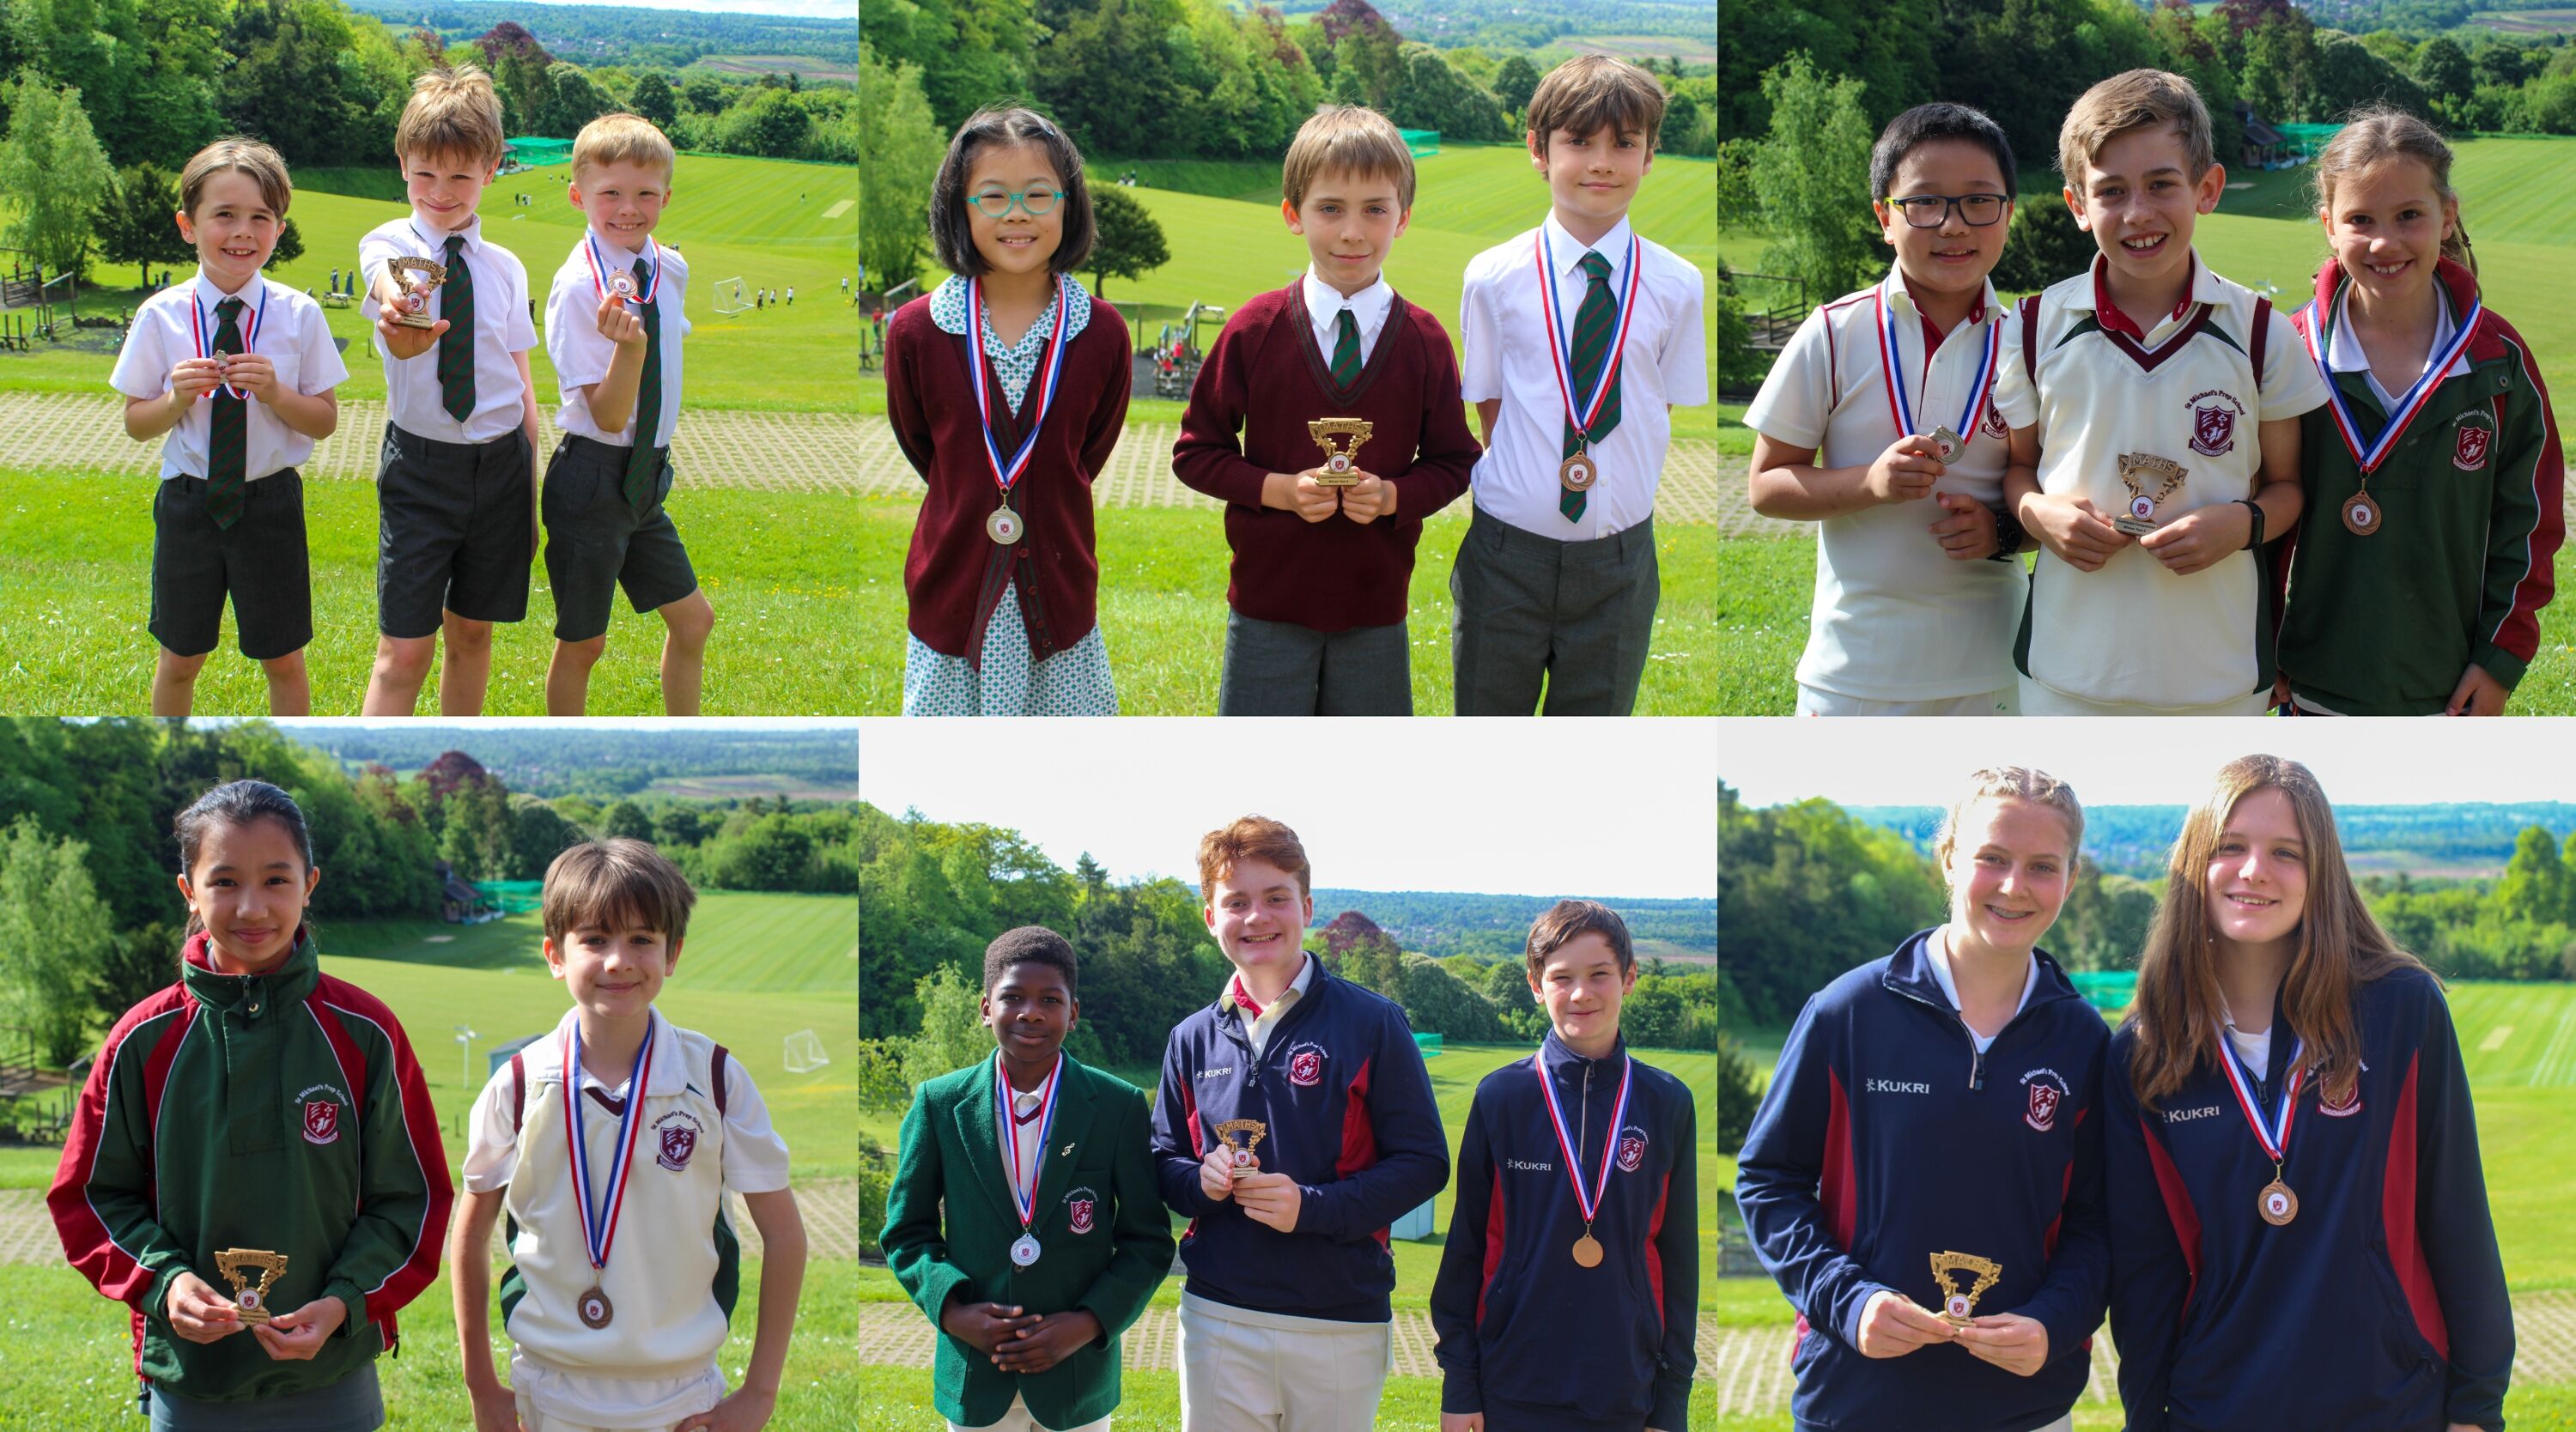 Maths competition winners collage